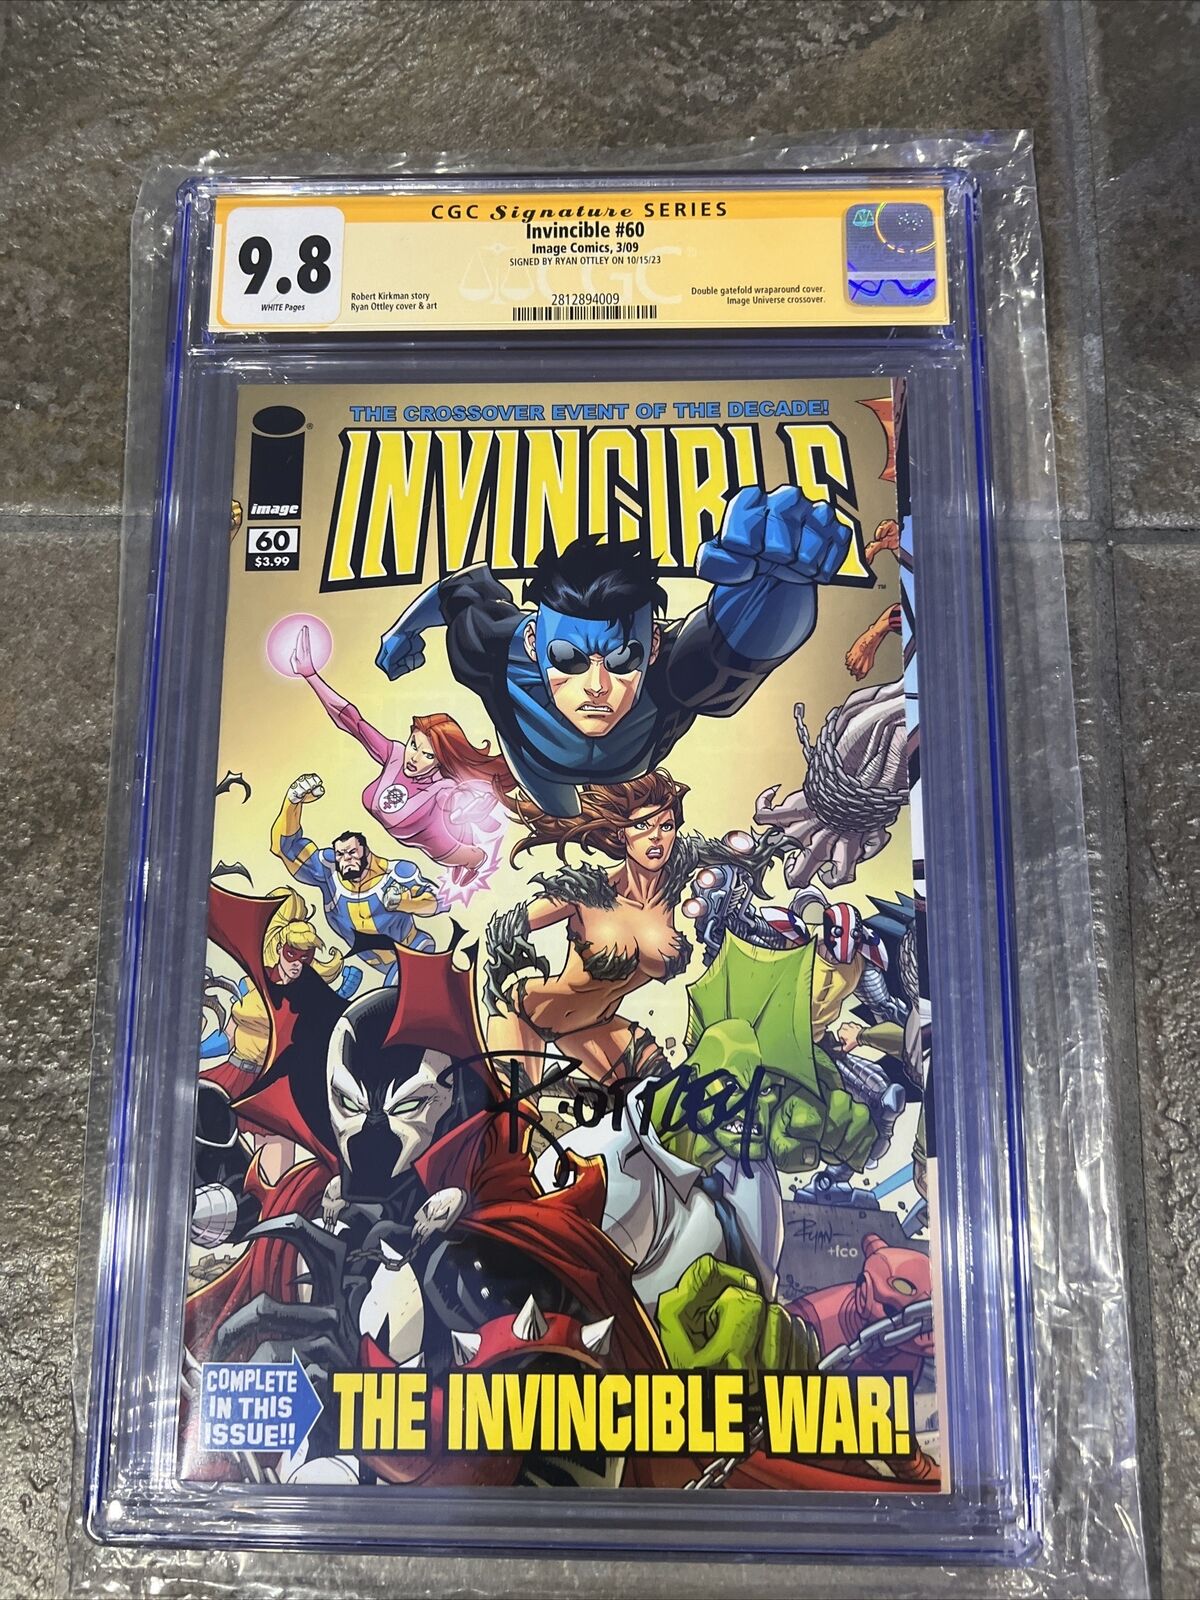 Invincible #60 CGC SS 9.8 SIGNED Ryan Ottley Gatefold Wraparound Cover 2009